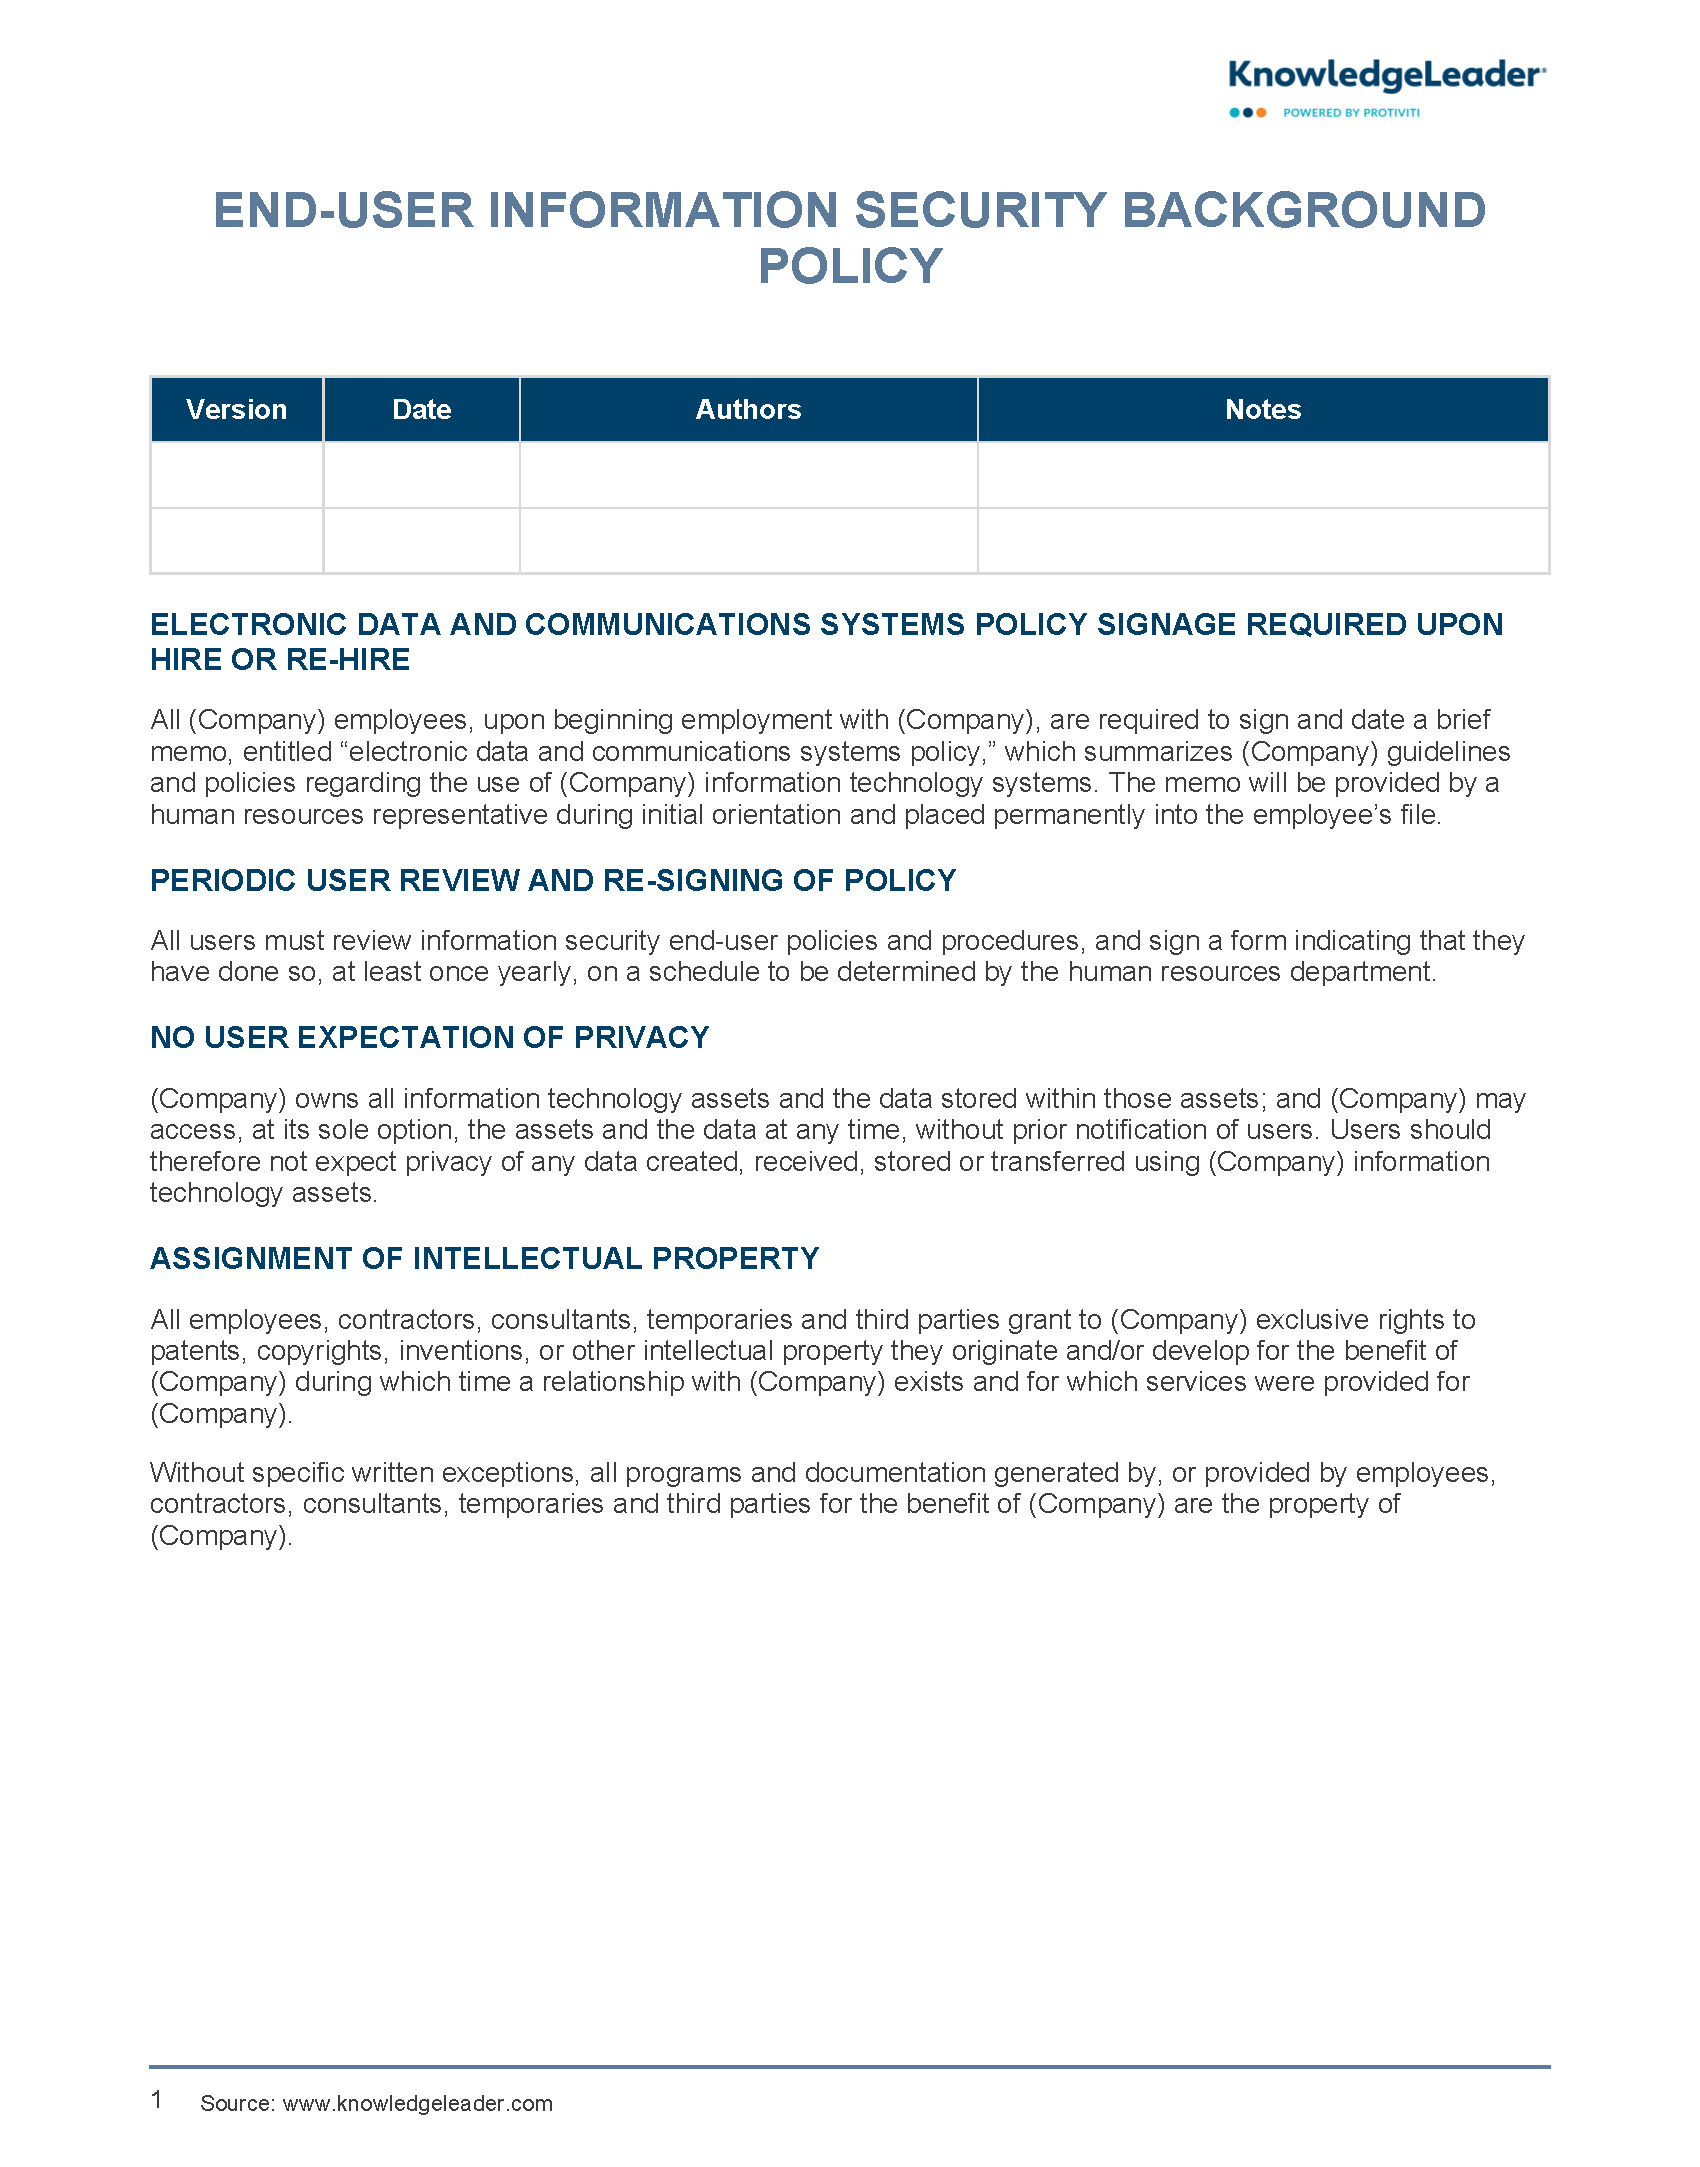 Screenshot of the first page of End-User Information Security Background Policy